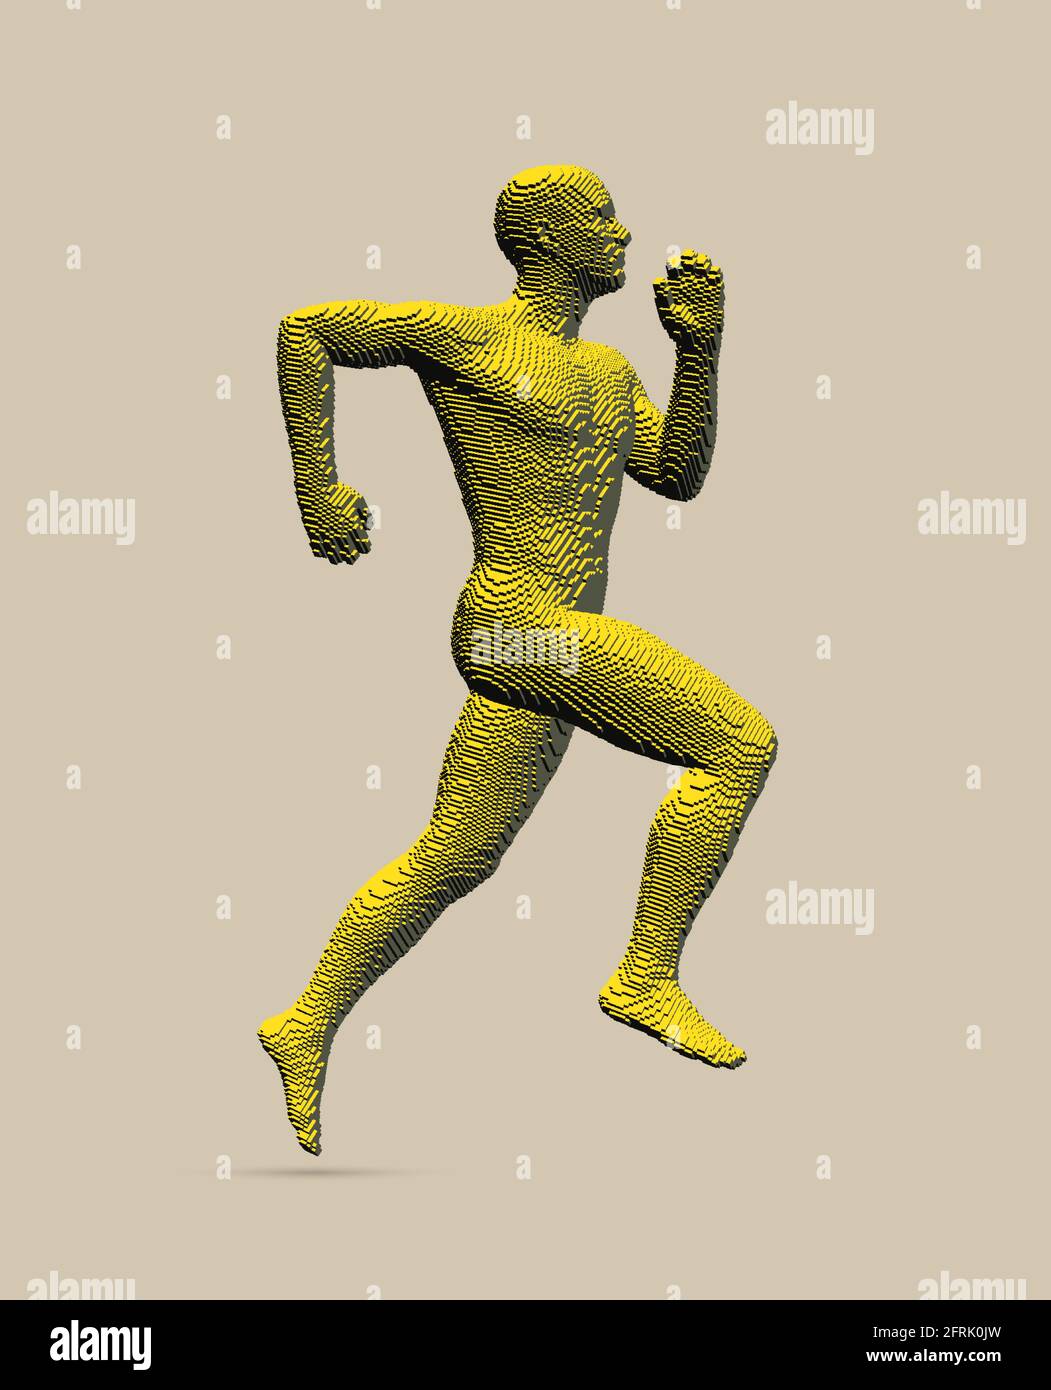 Premium Photo  3d illustration with male figure running and speed